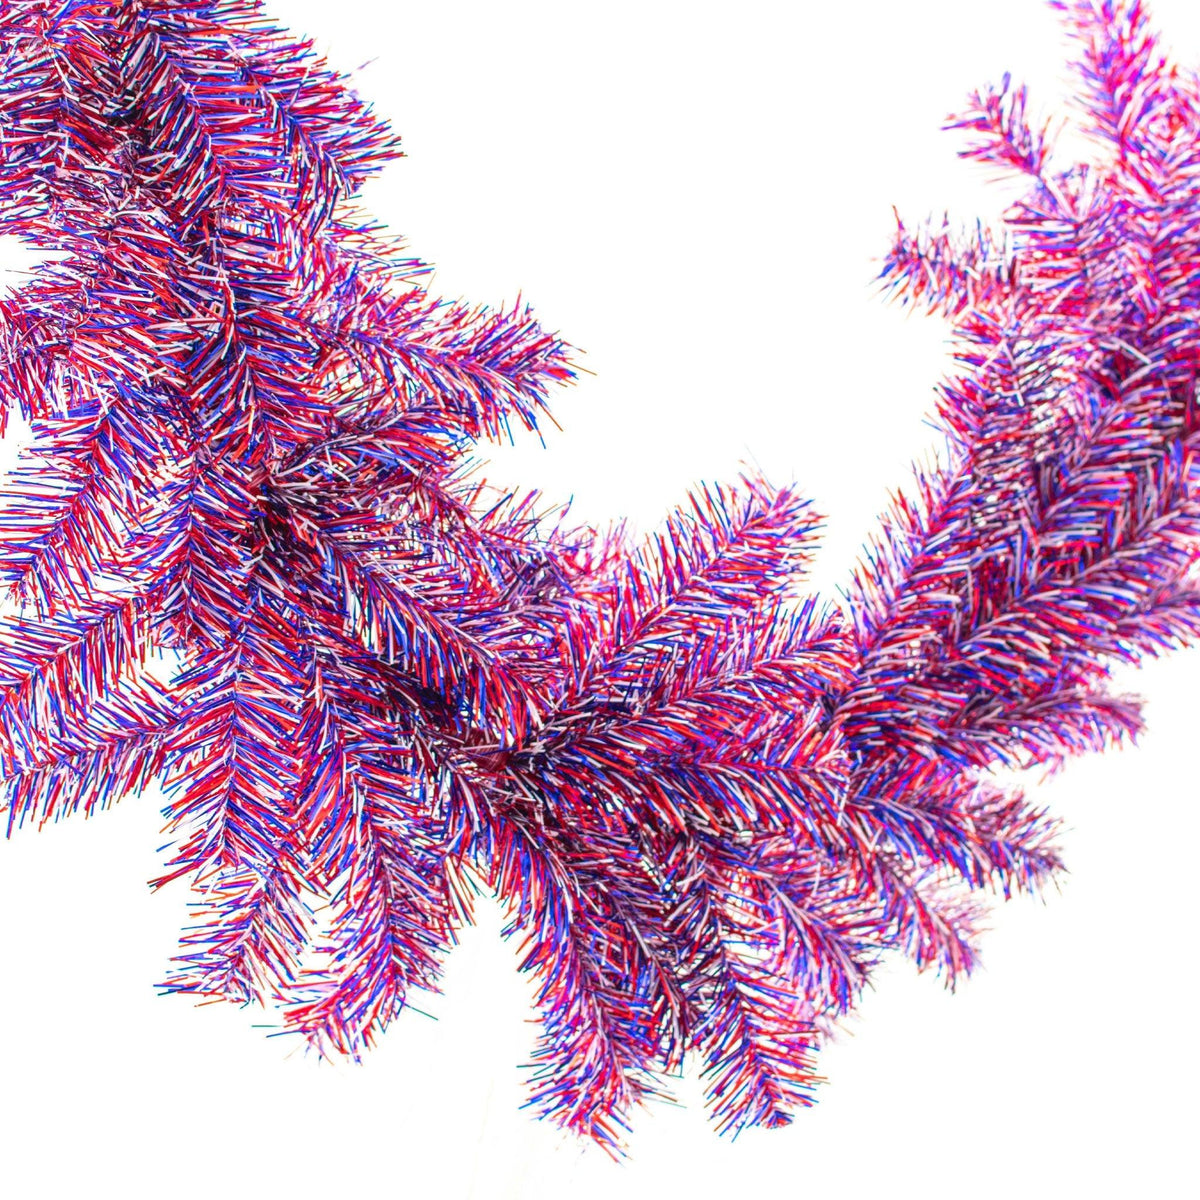 Buy Lee Display's 6FT 4th of July Red White and Blue Firework Tinsel Brush Garland.  Available now at leedisplay.com